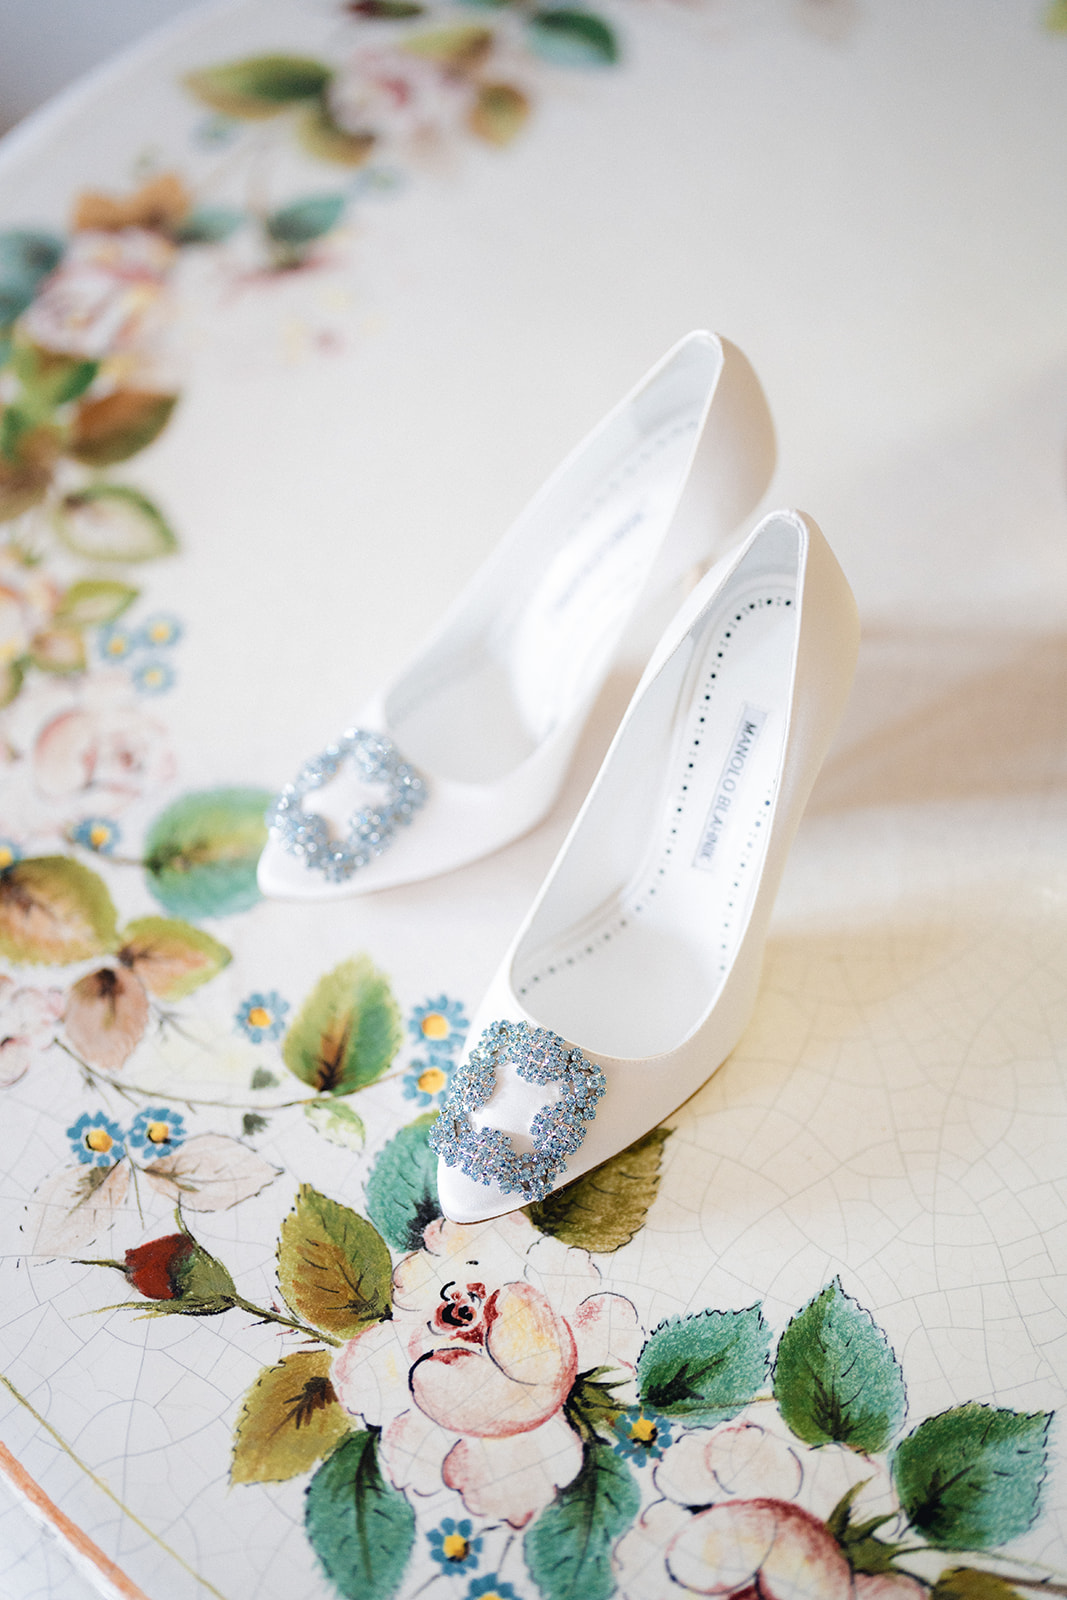 The Manolo Blahnik shoes of the bride